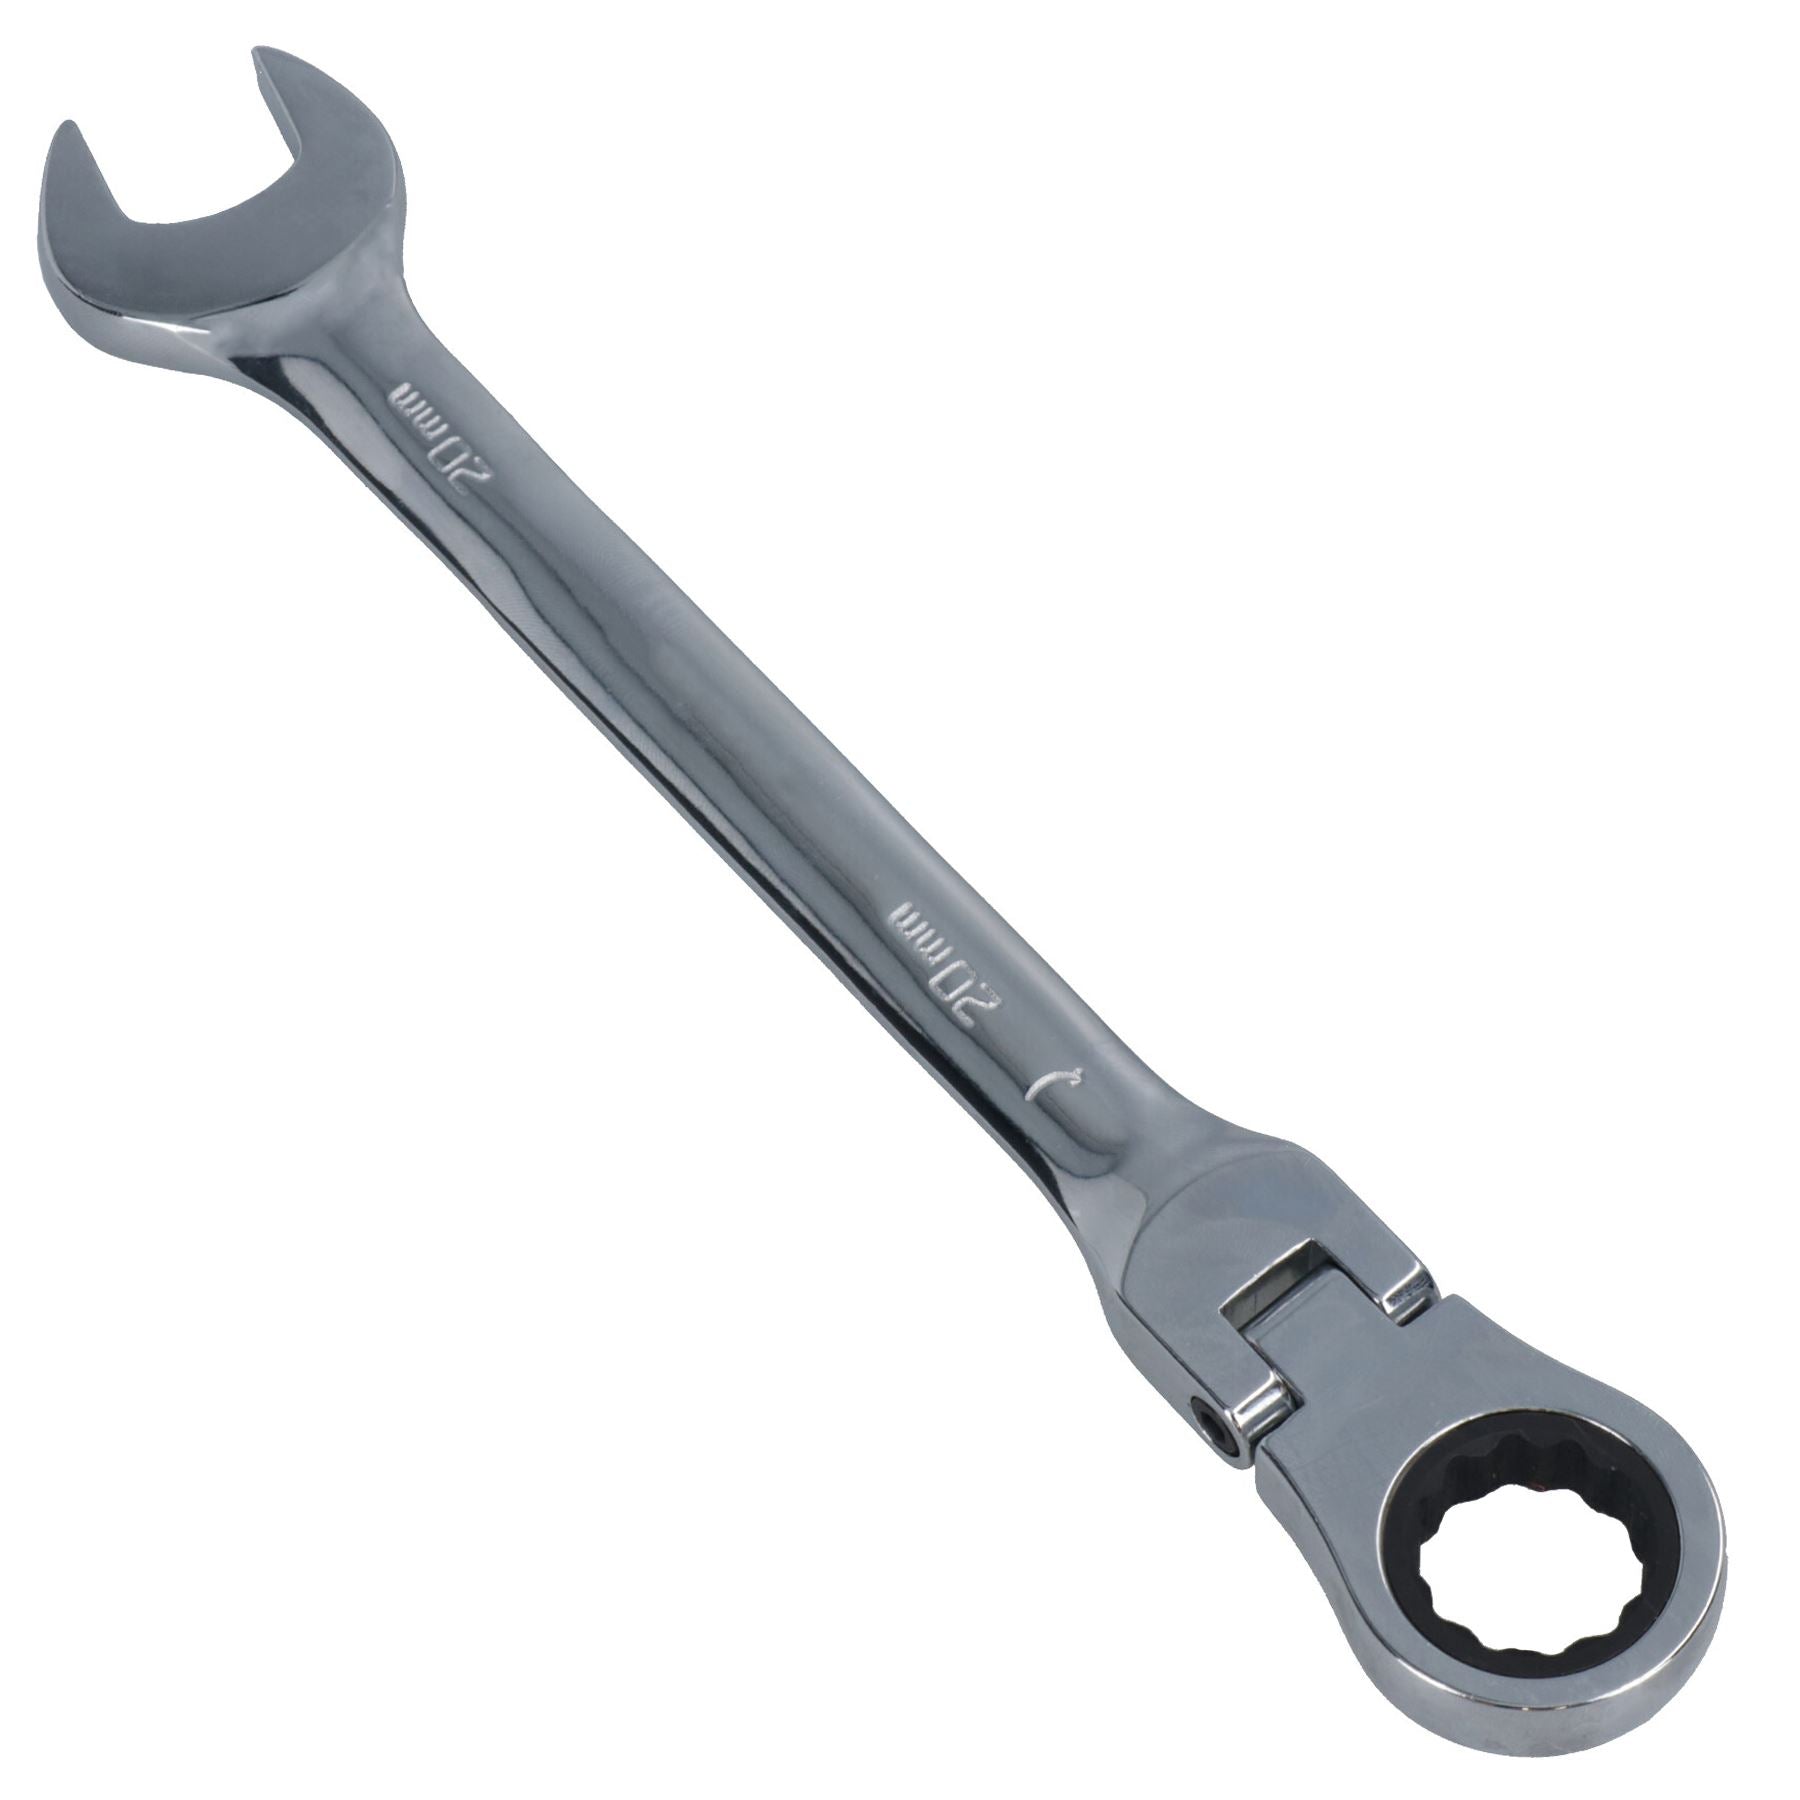 20mm Metric Flexible Combination Ratchet Spanner wrench 12 Sided 72 Teeth